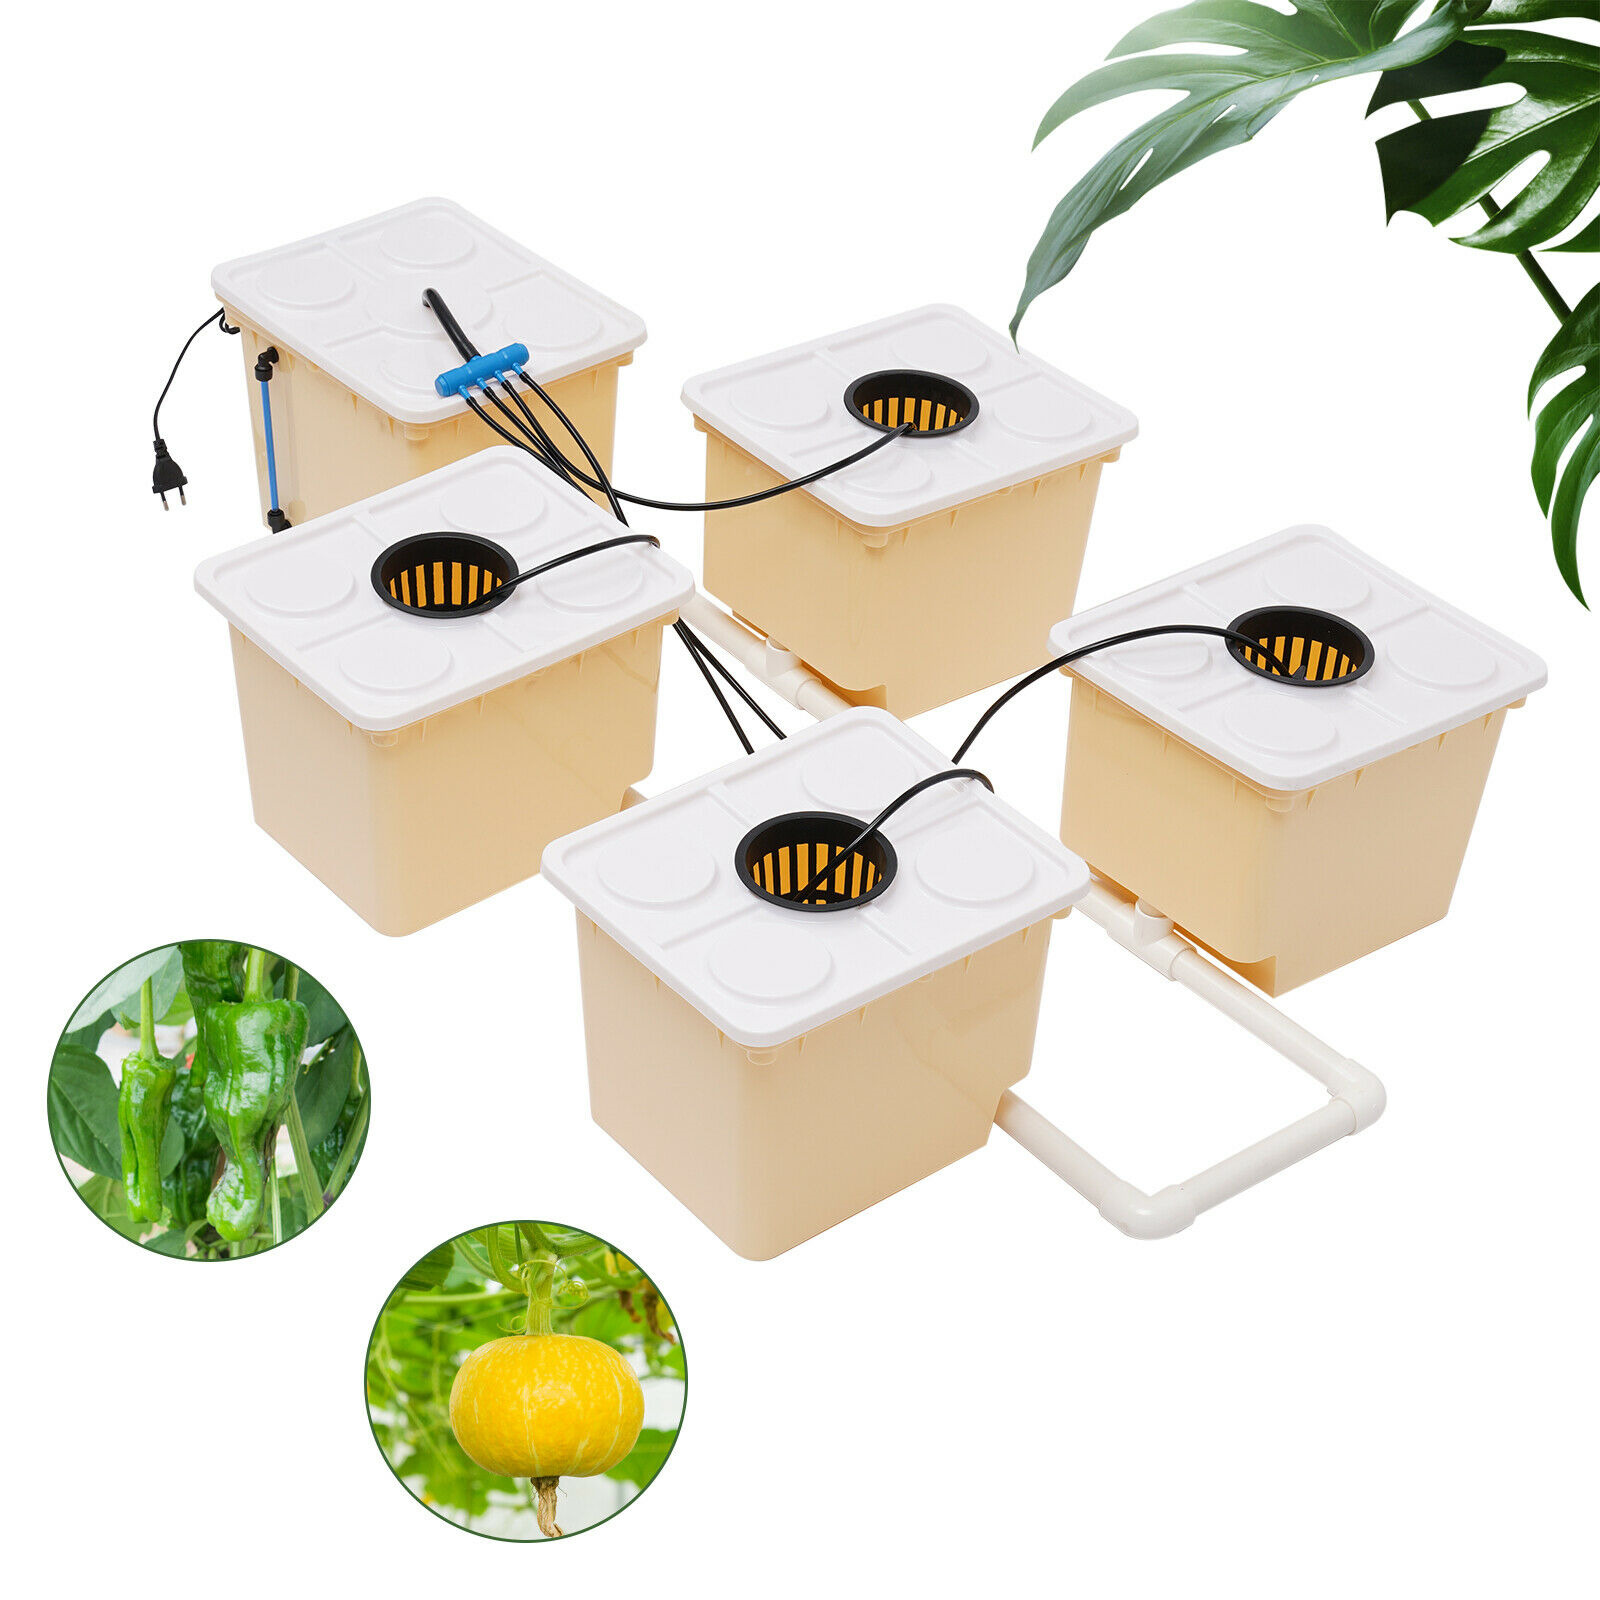  Deep Water Culture Hydroponic System Grow Kit W/Submerged Pump US STOCK